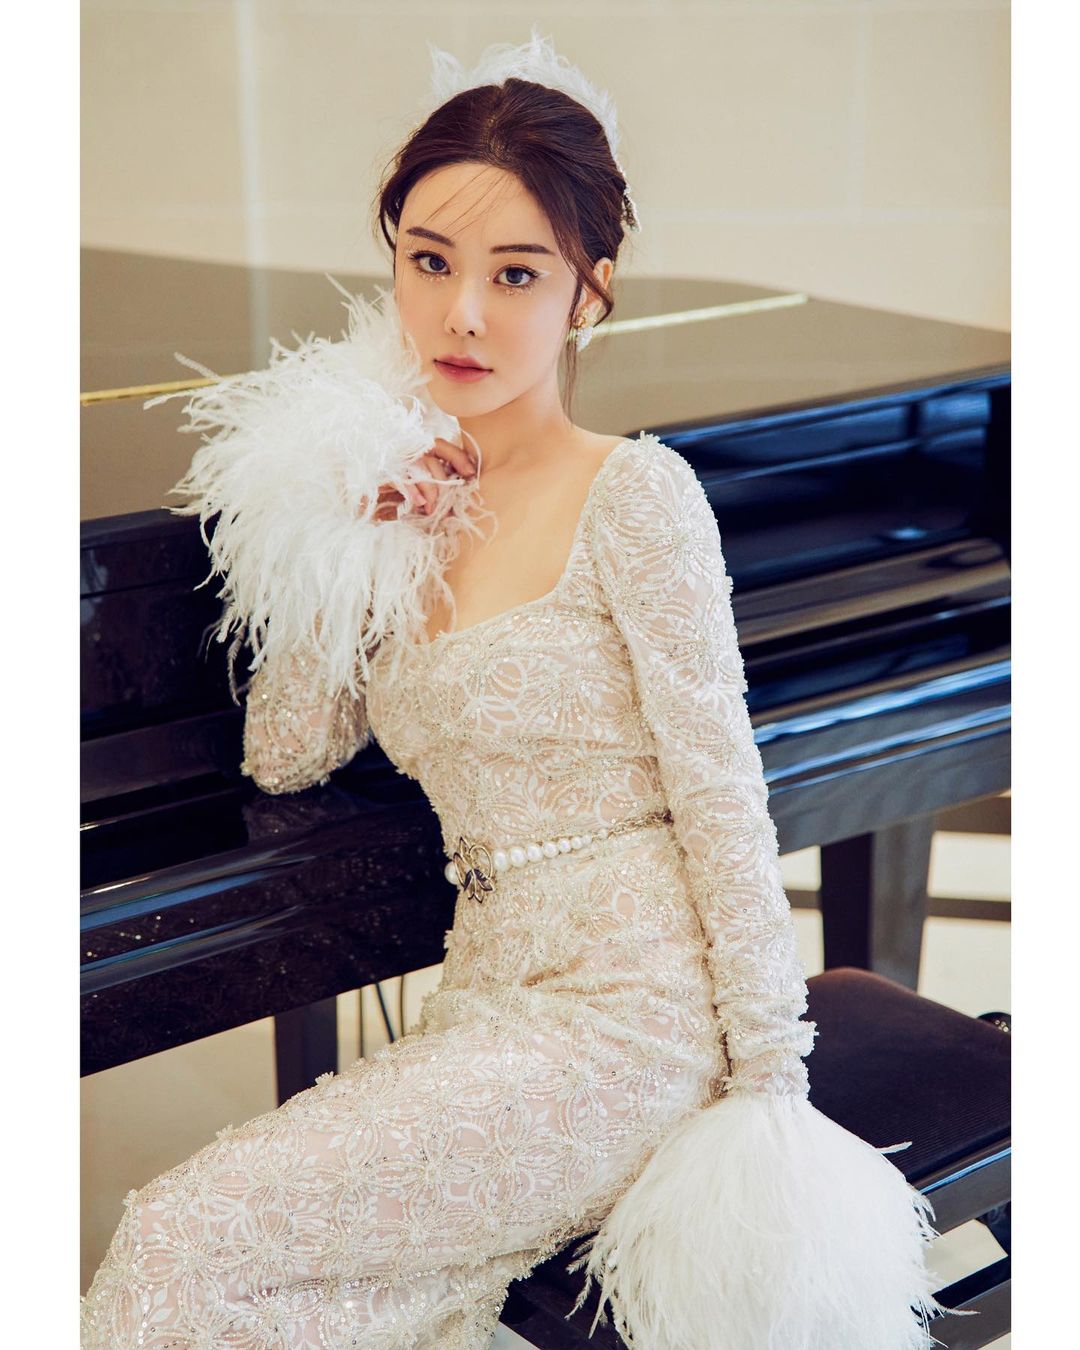 Abby Choi, a Hong Kong influencer sitting next to a piano and dressed in gown